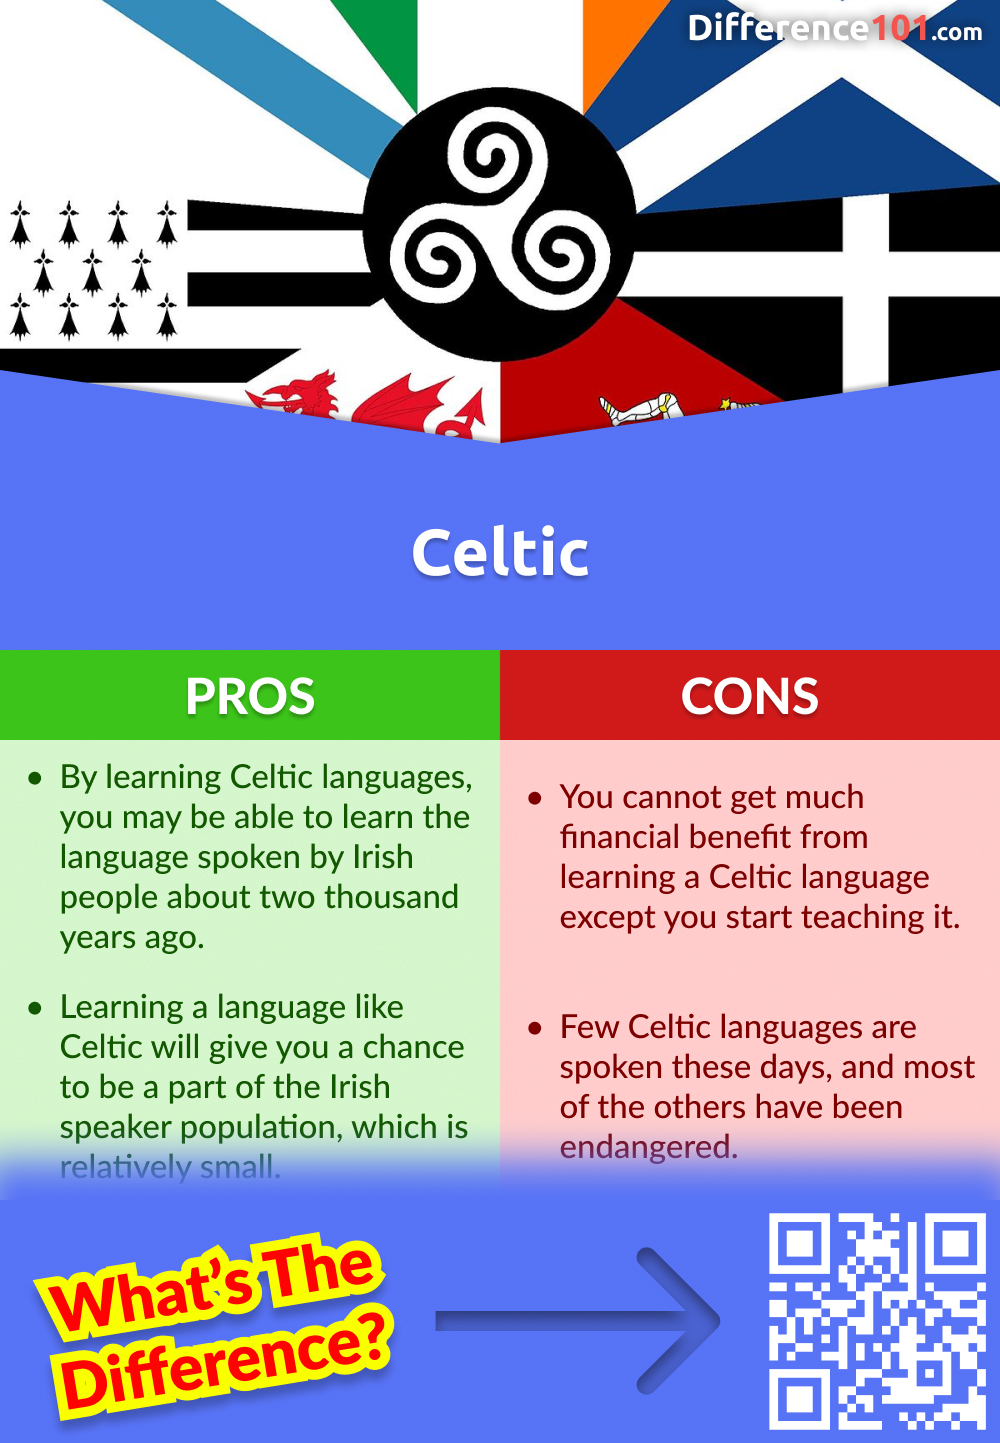 Celtic Pros and Cons